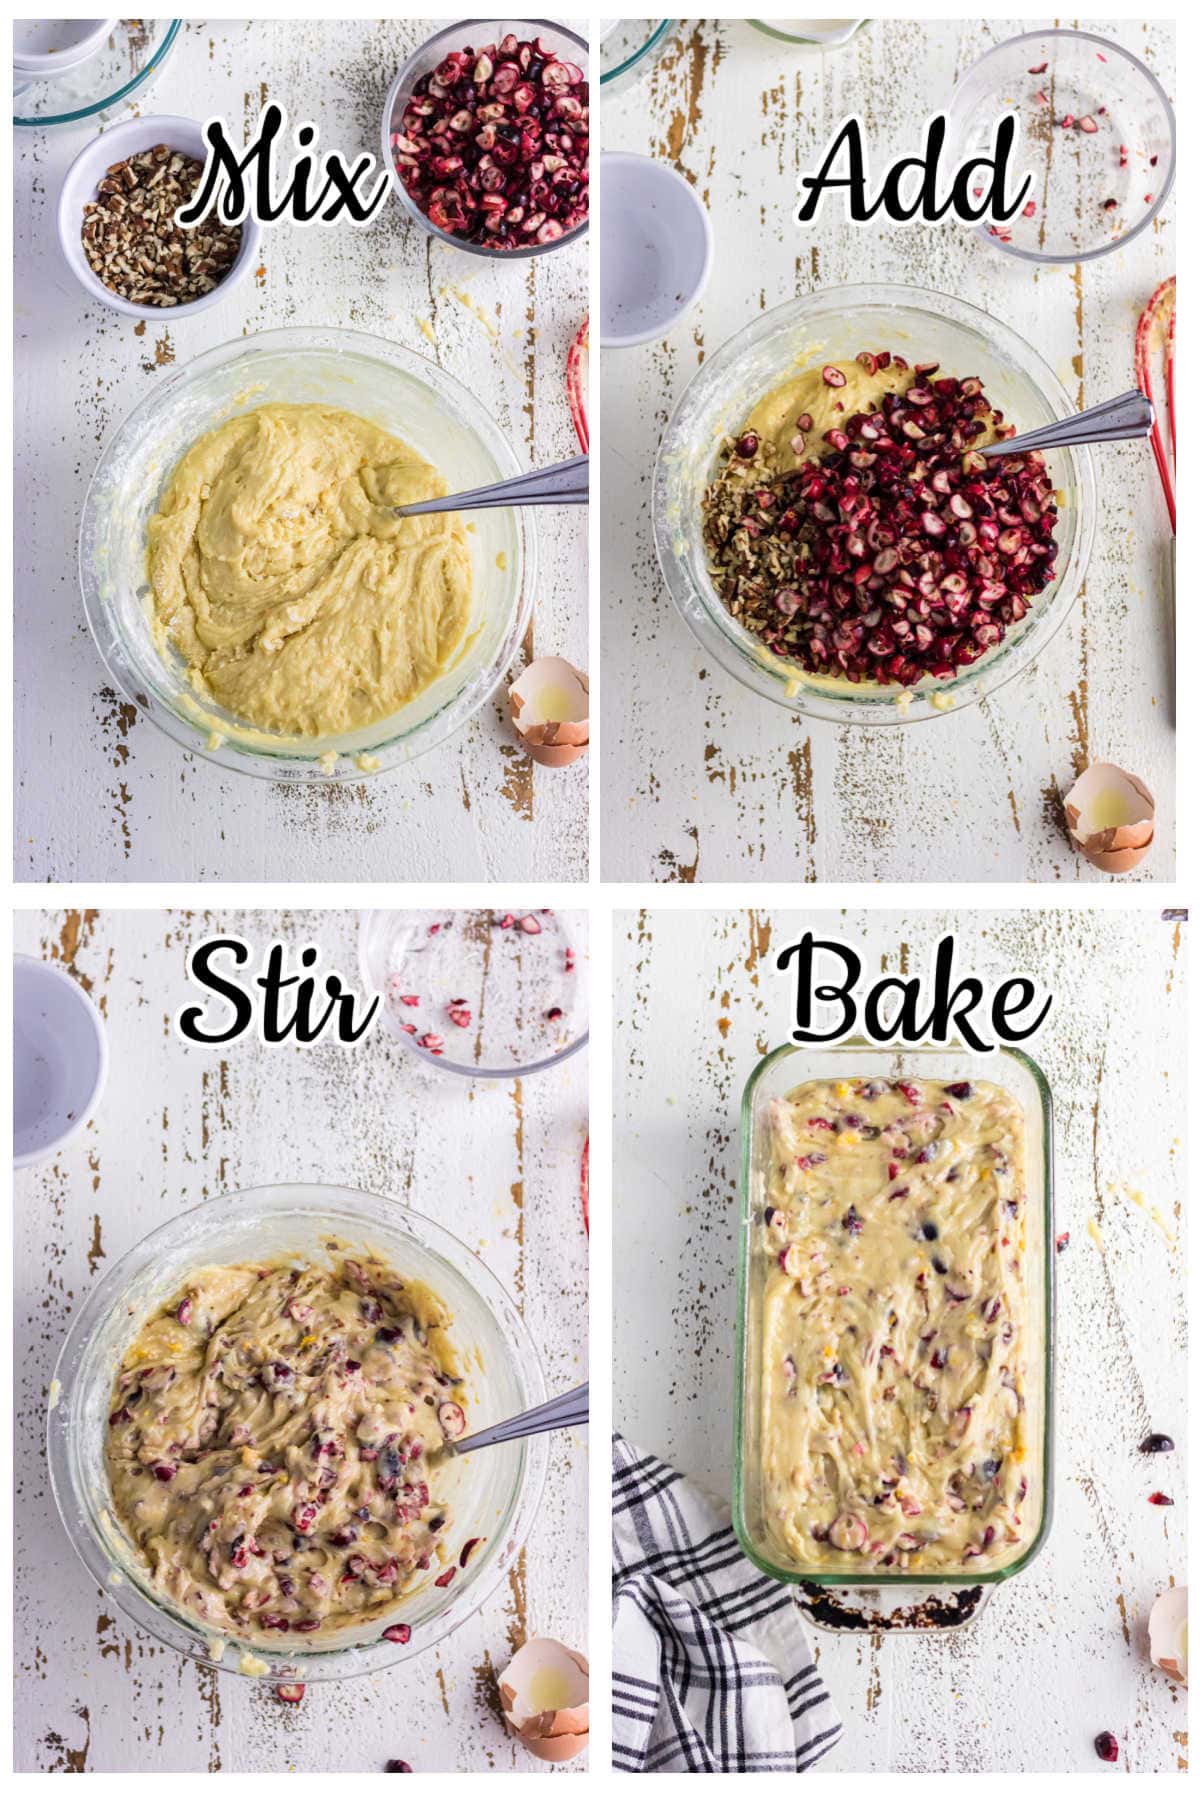 Step by step images for making cranberry bread.